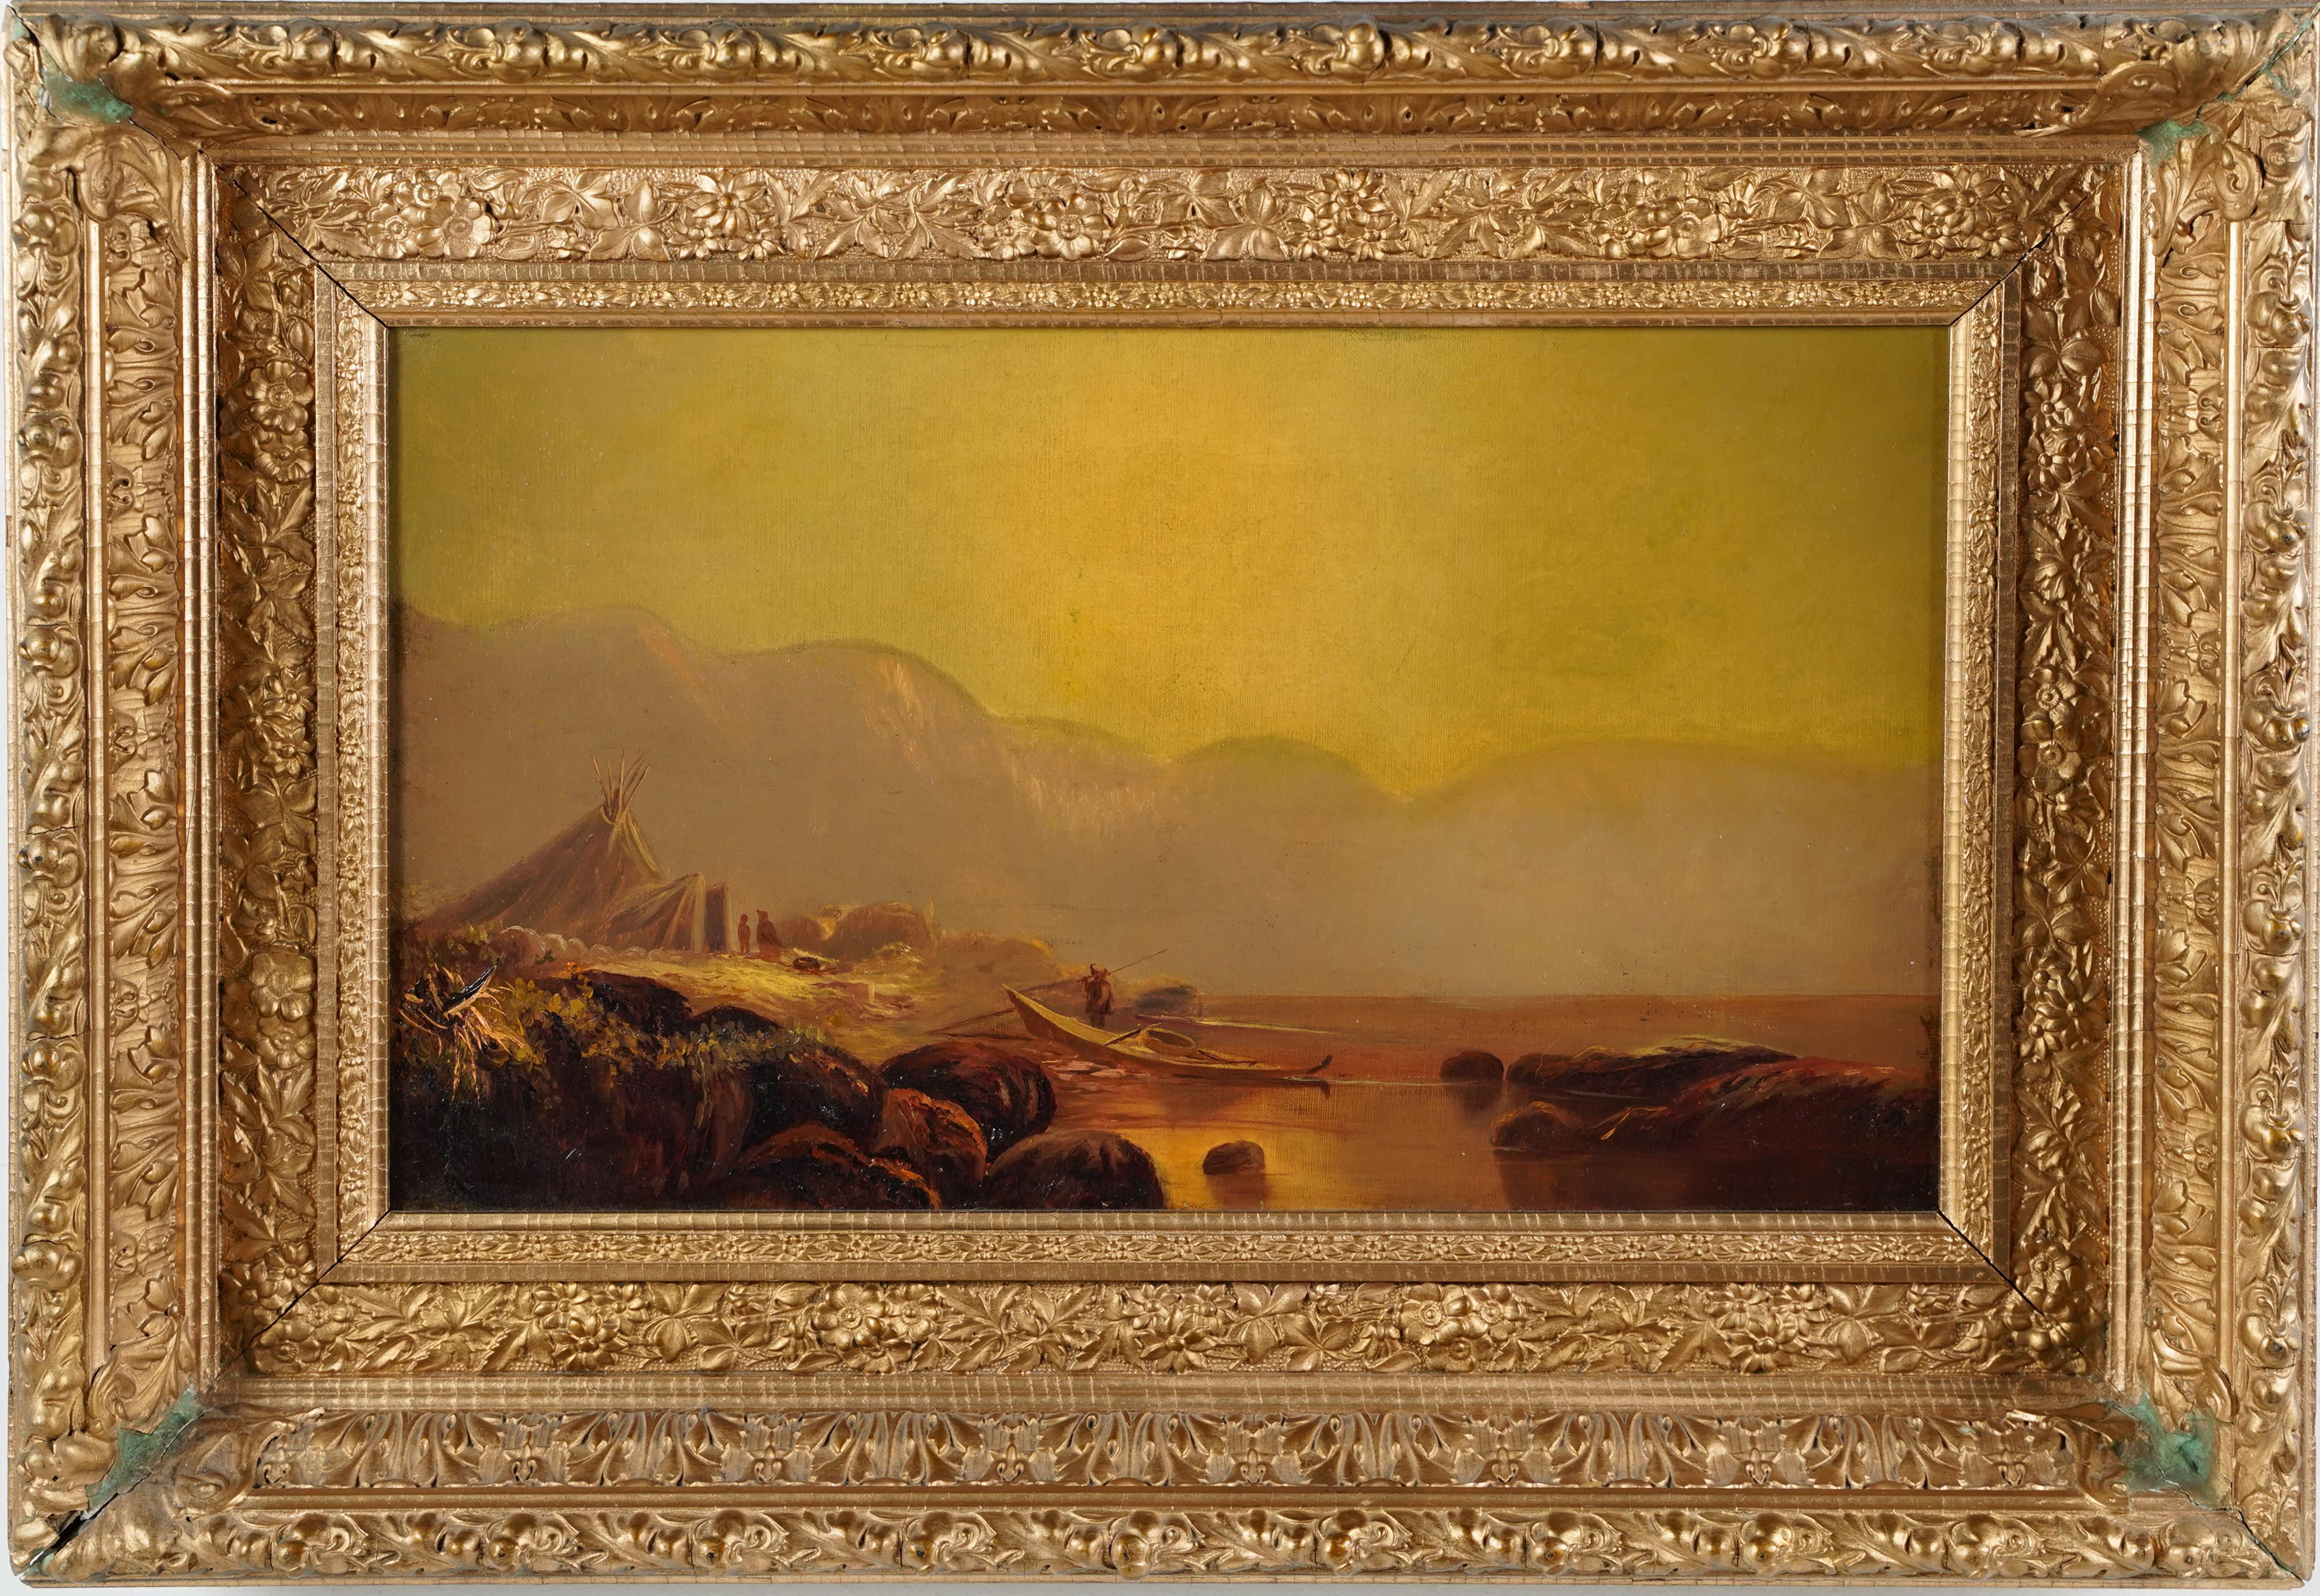 Antique American luminous seascape sunset oil painting.  Oil on canvas.   Framed.  Image size, 20L x 12H.